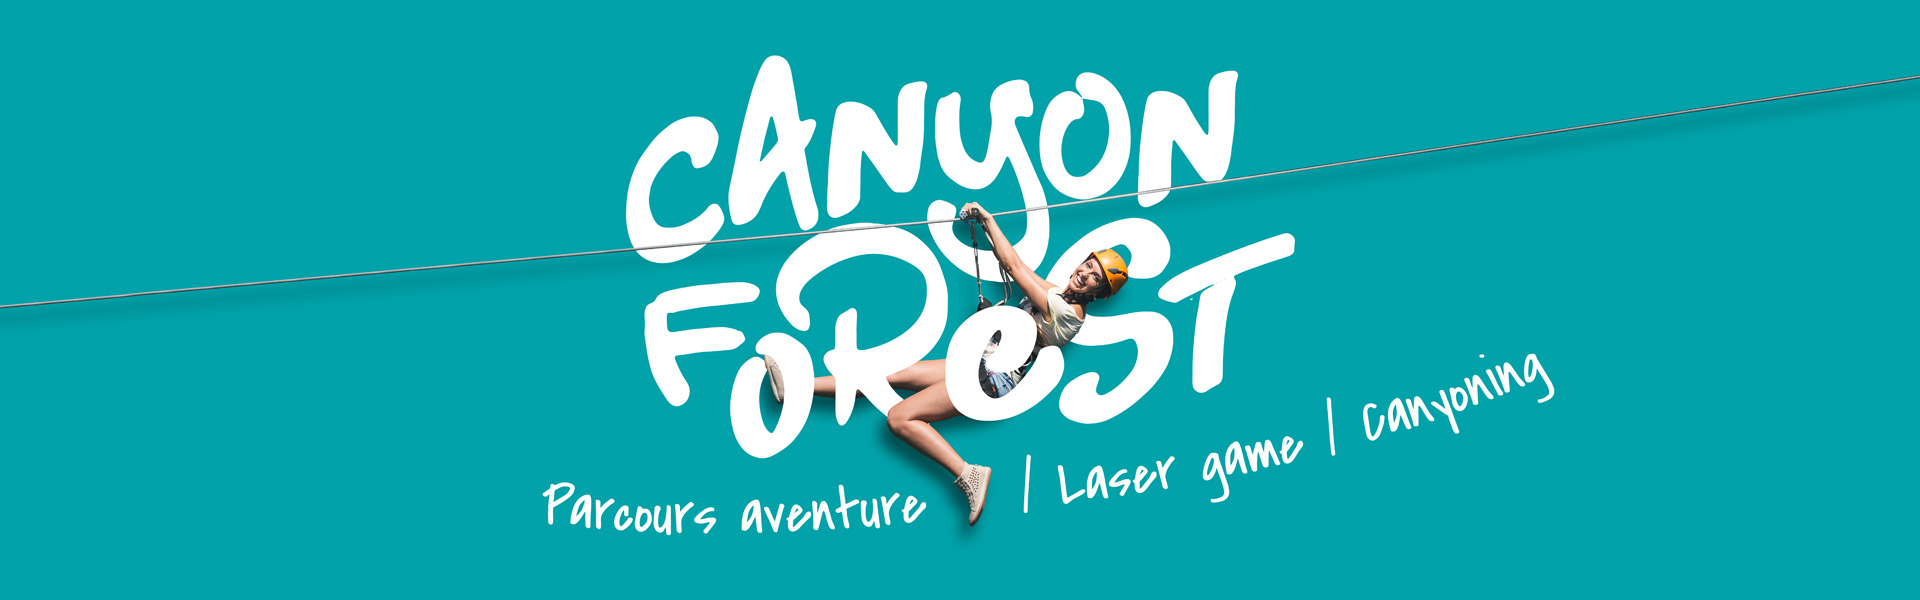 Canyon Forest - Parcours aventure - Laser game - Canyoning